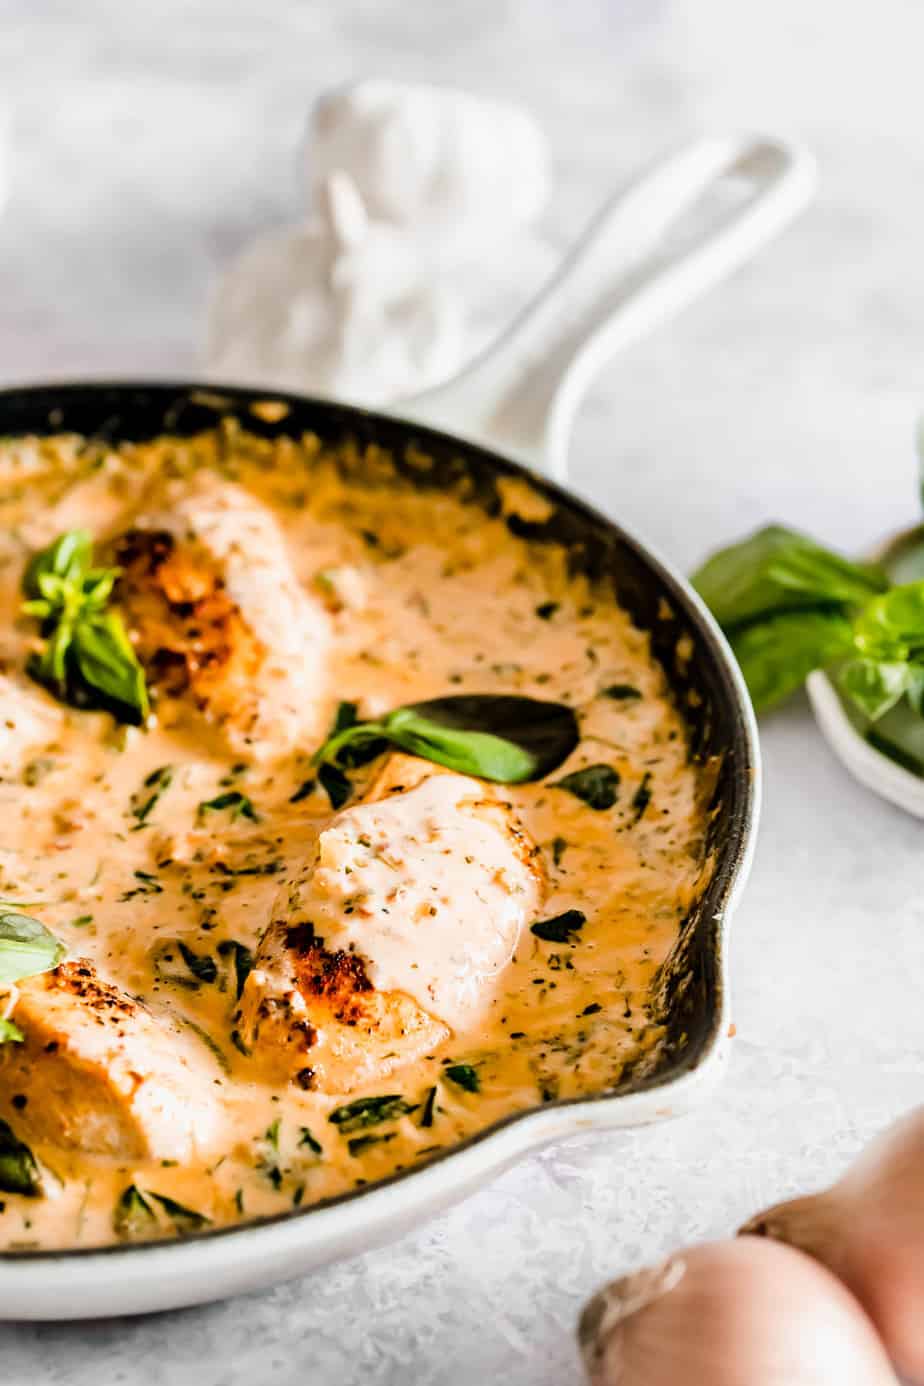 Creamy sauce and chicken in a pan.